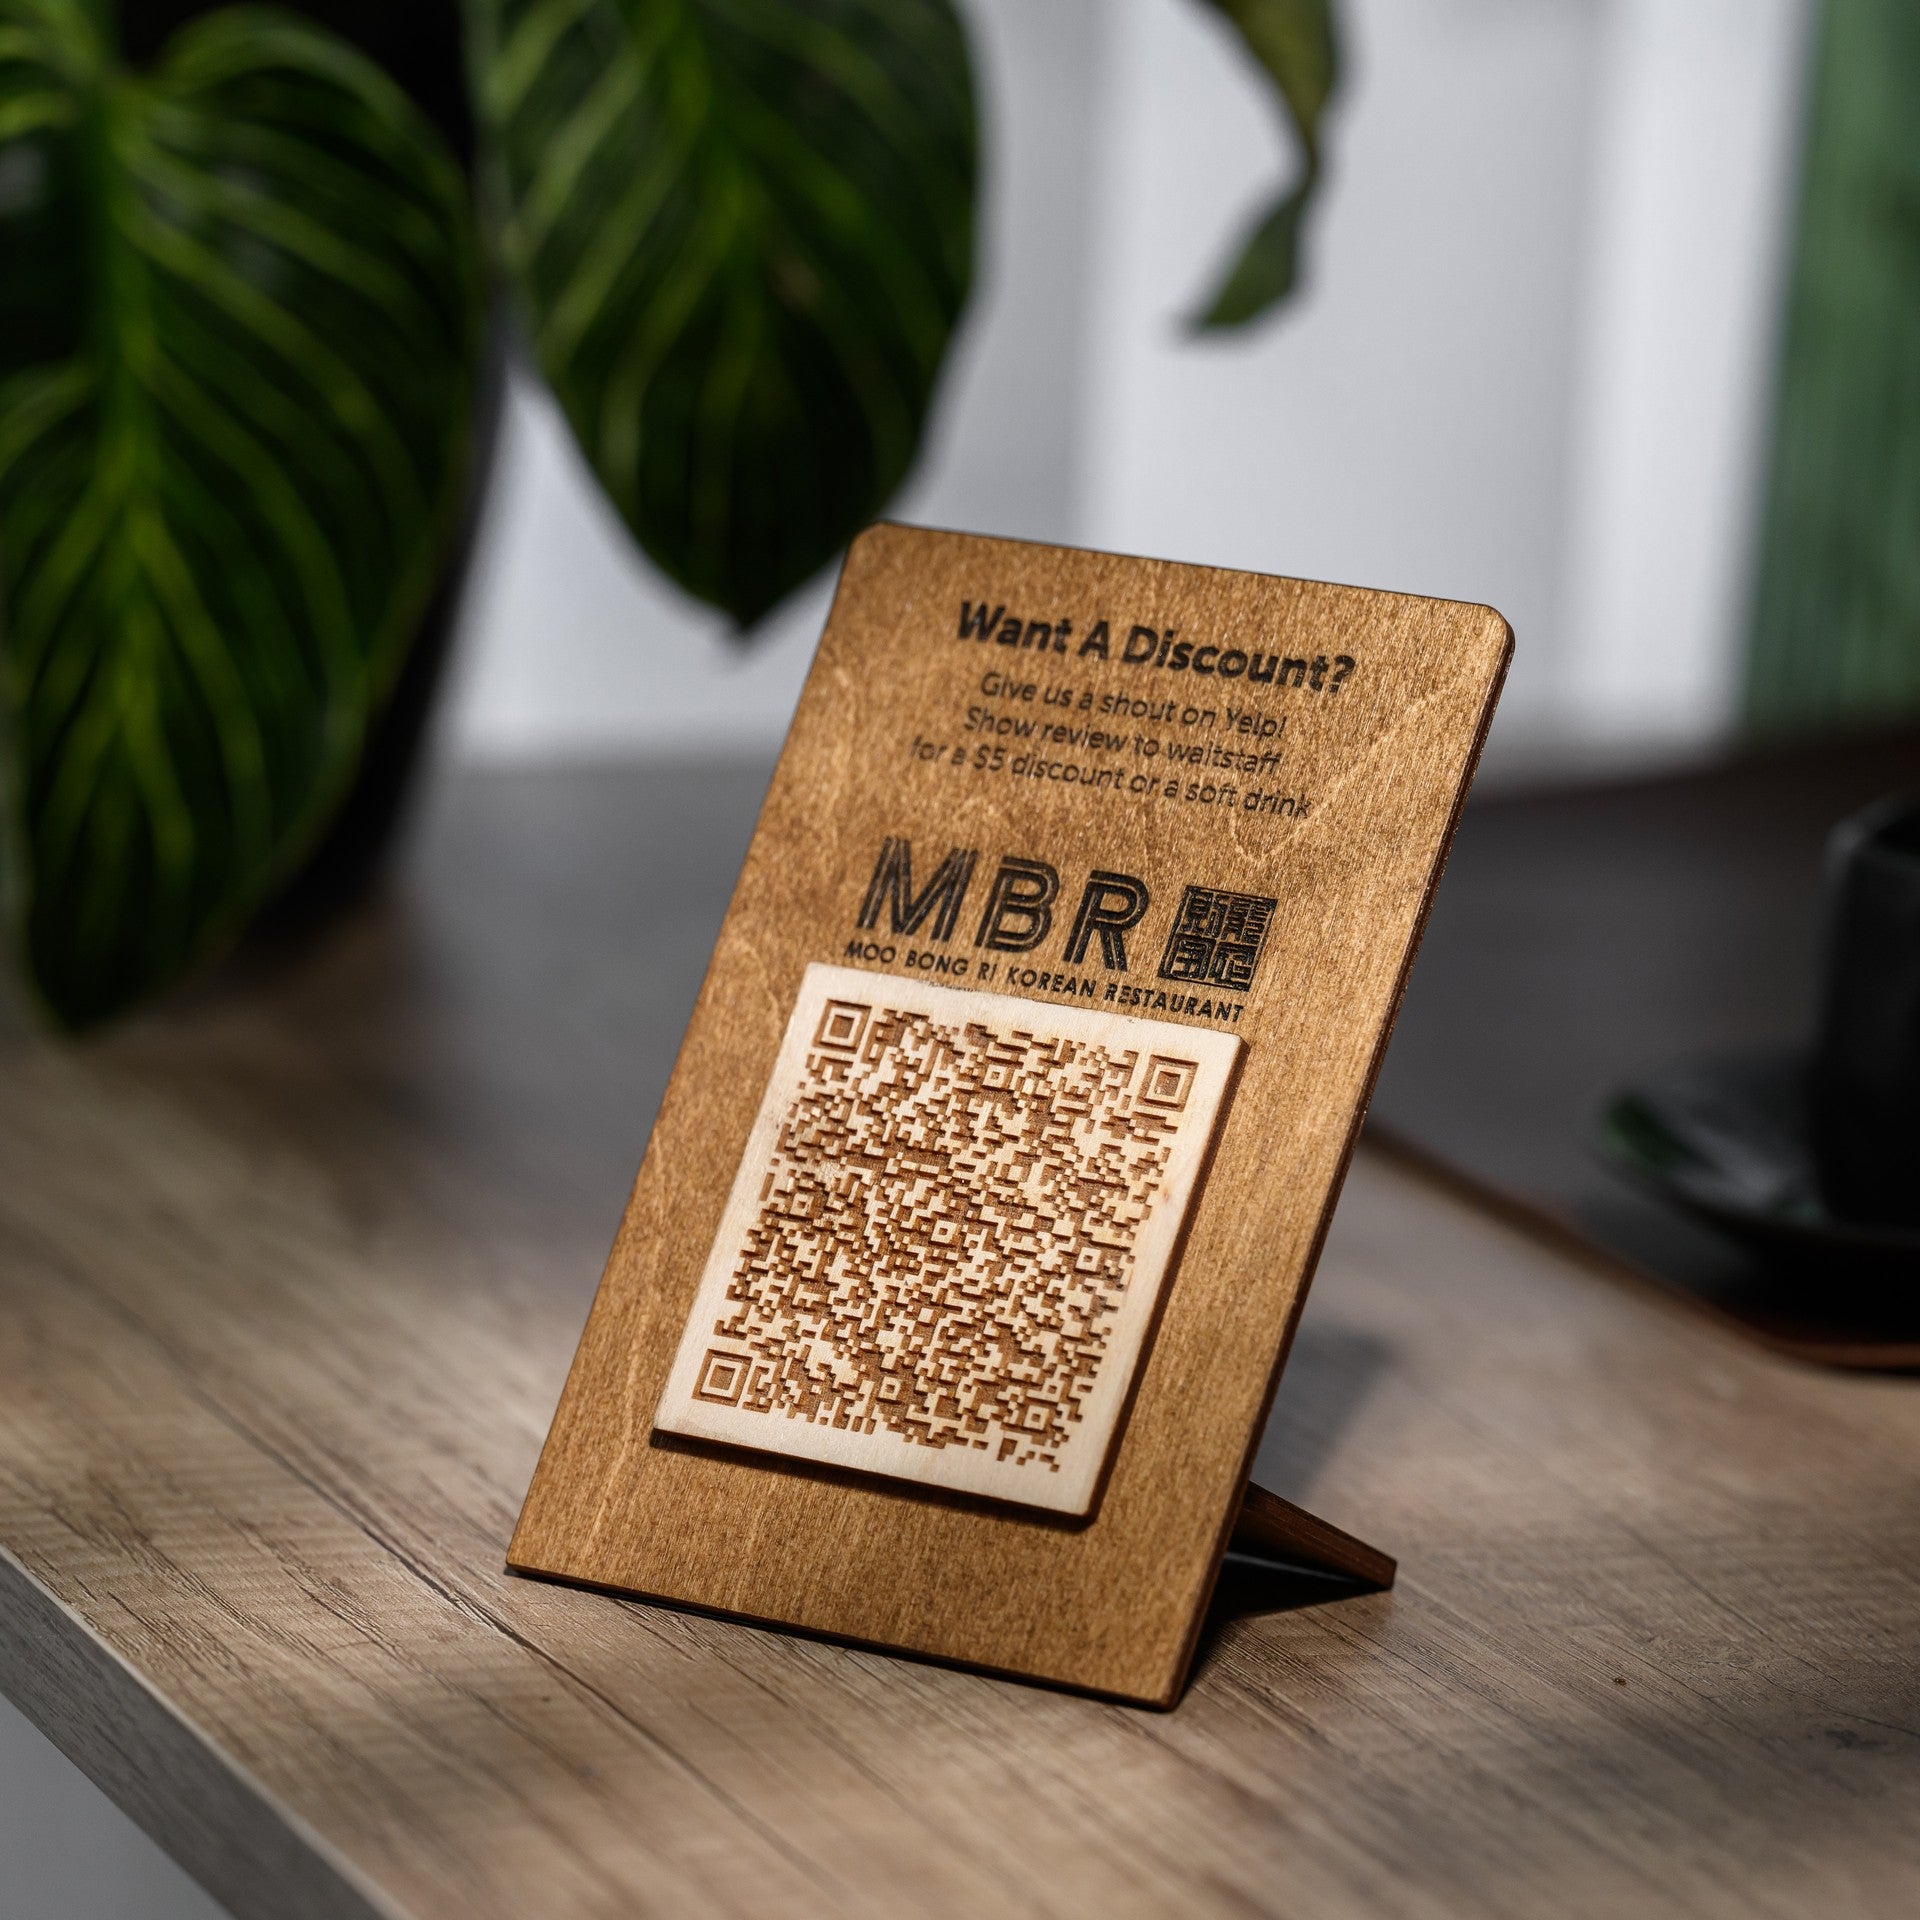 QR Code Sign for quick access, ideal for cafe and bar menus. Personalized stand for easy scanning and payments.